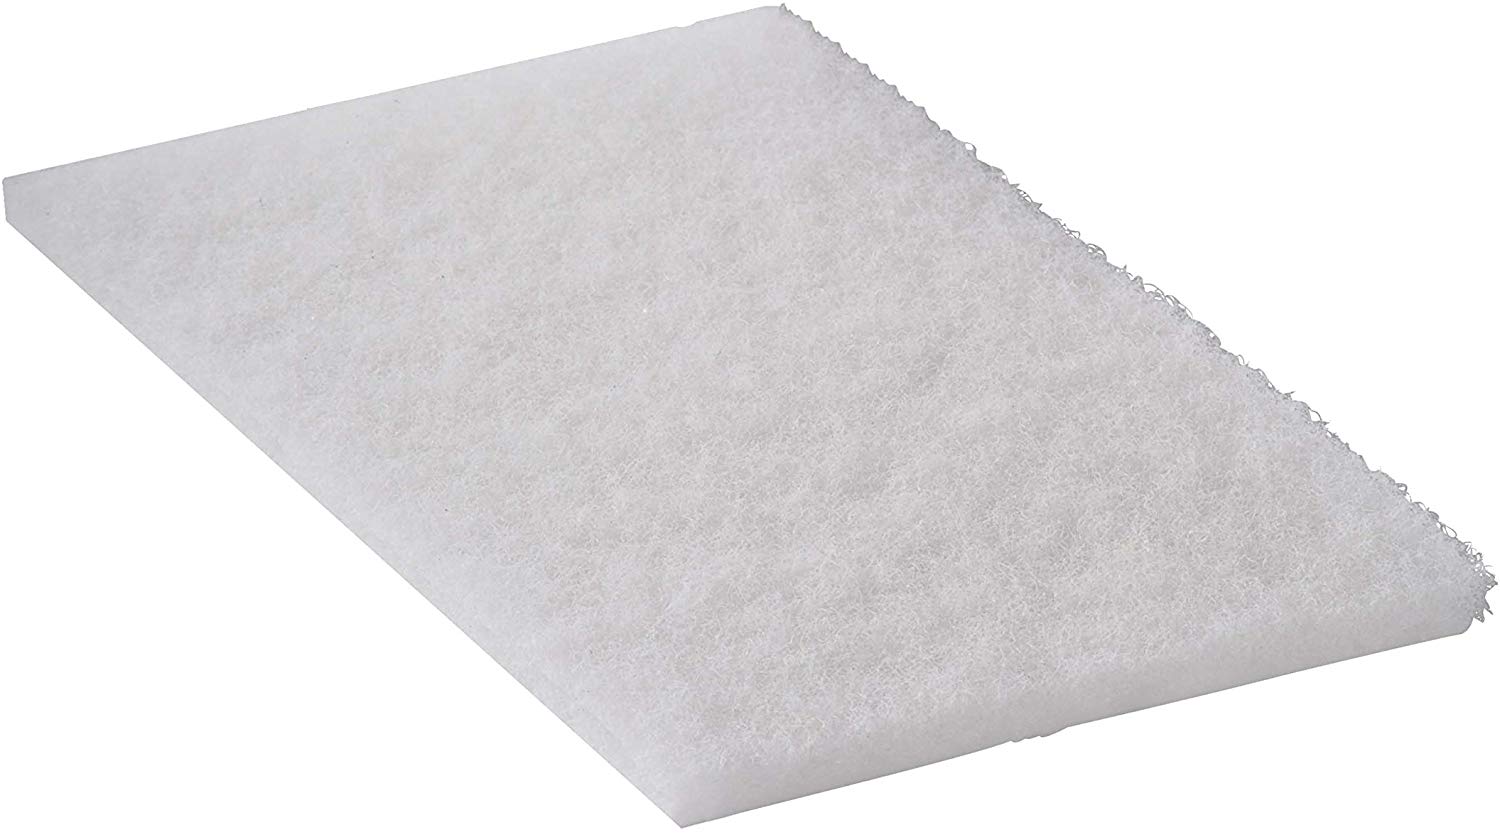 Americo Manufacturing 510110 92-98 Light Duty Hand Cleaning Pads (60 per Pack), White - CalCleaningEquipment